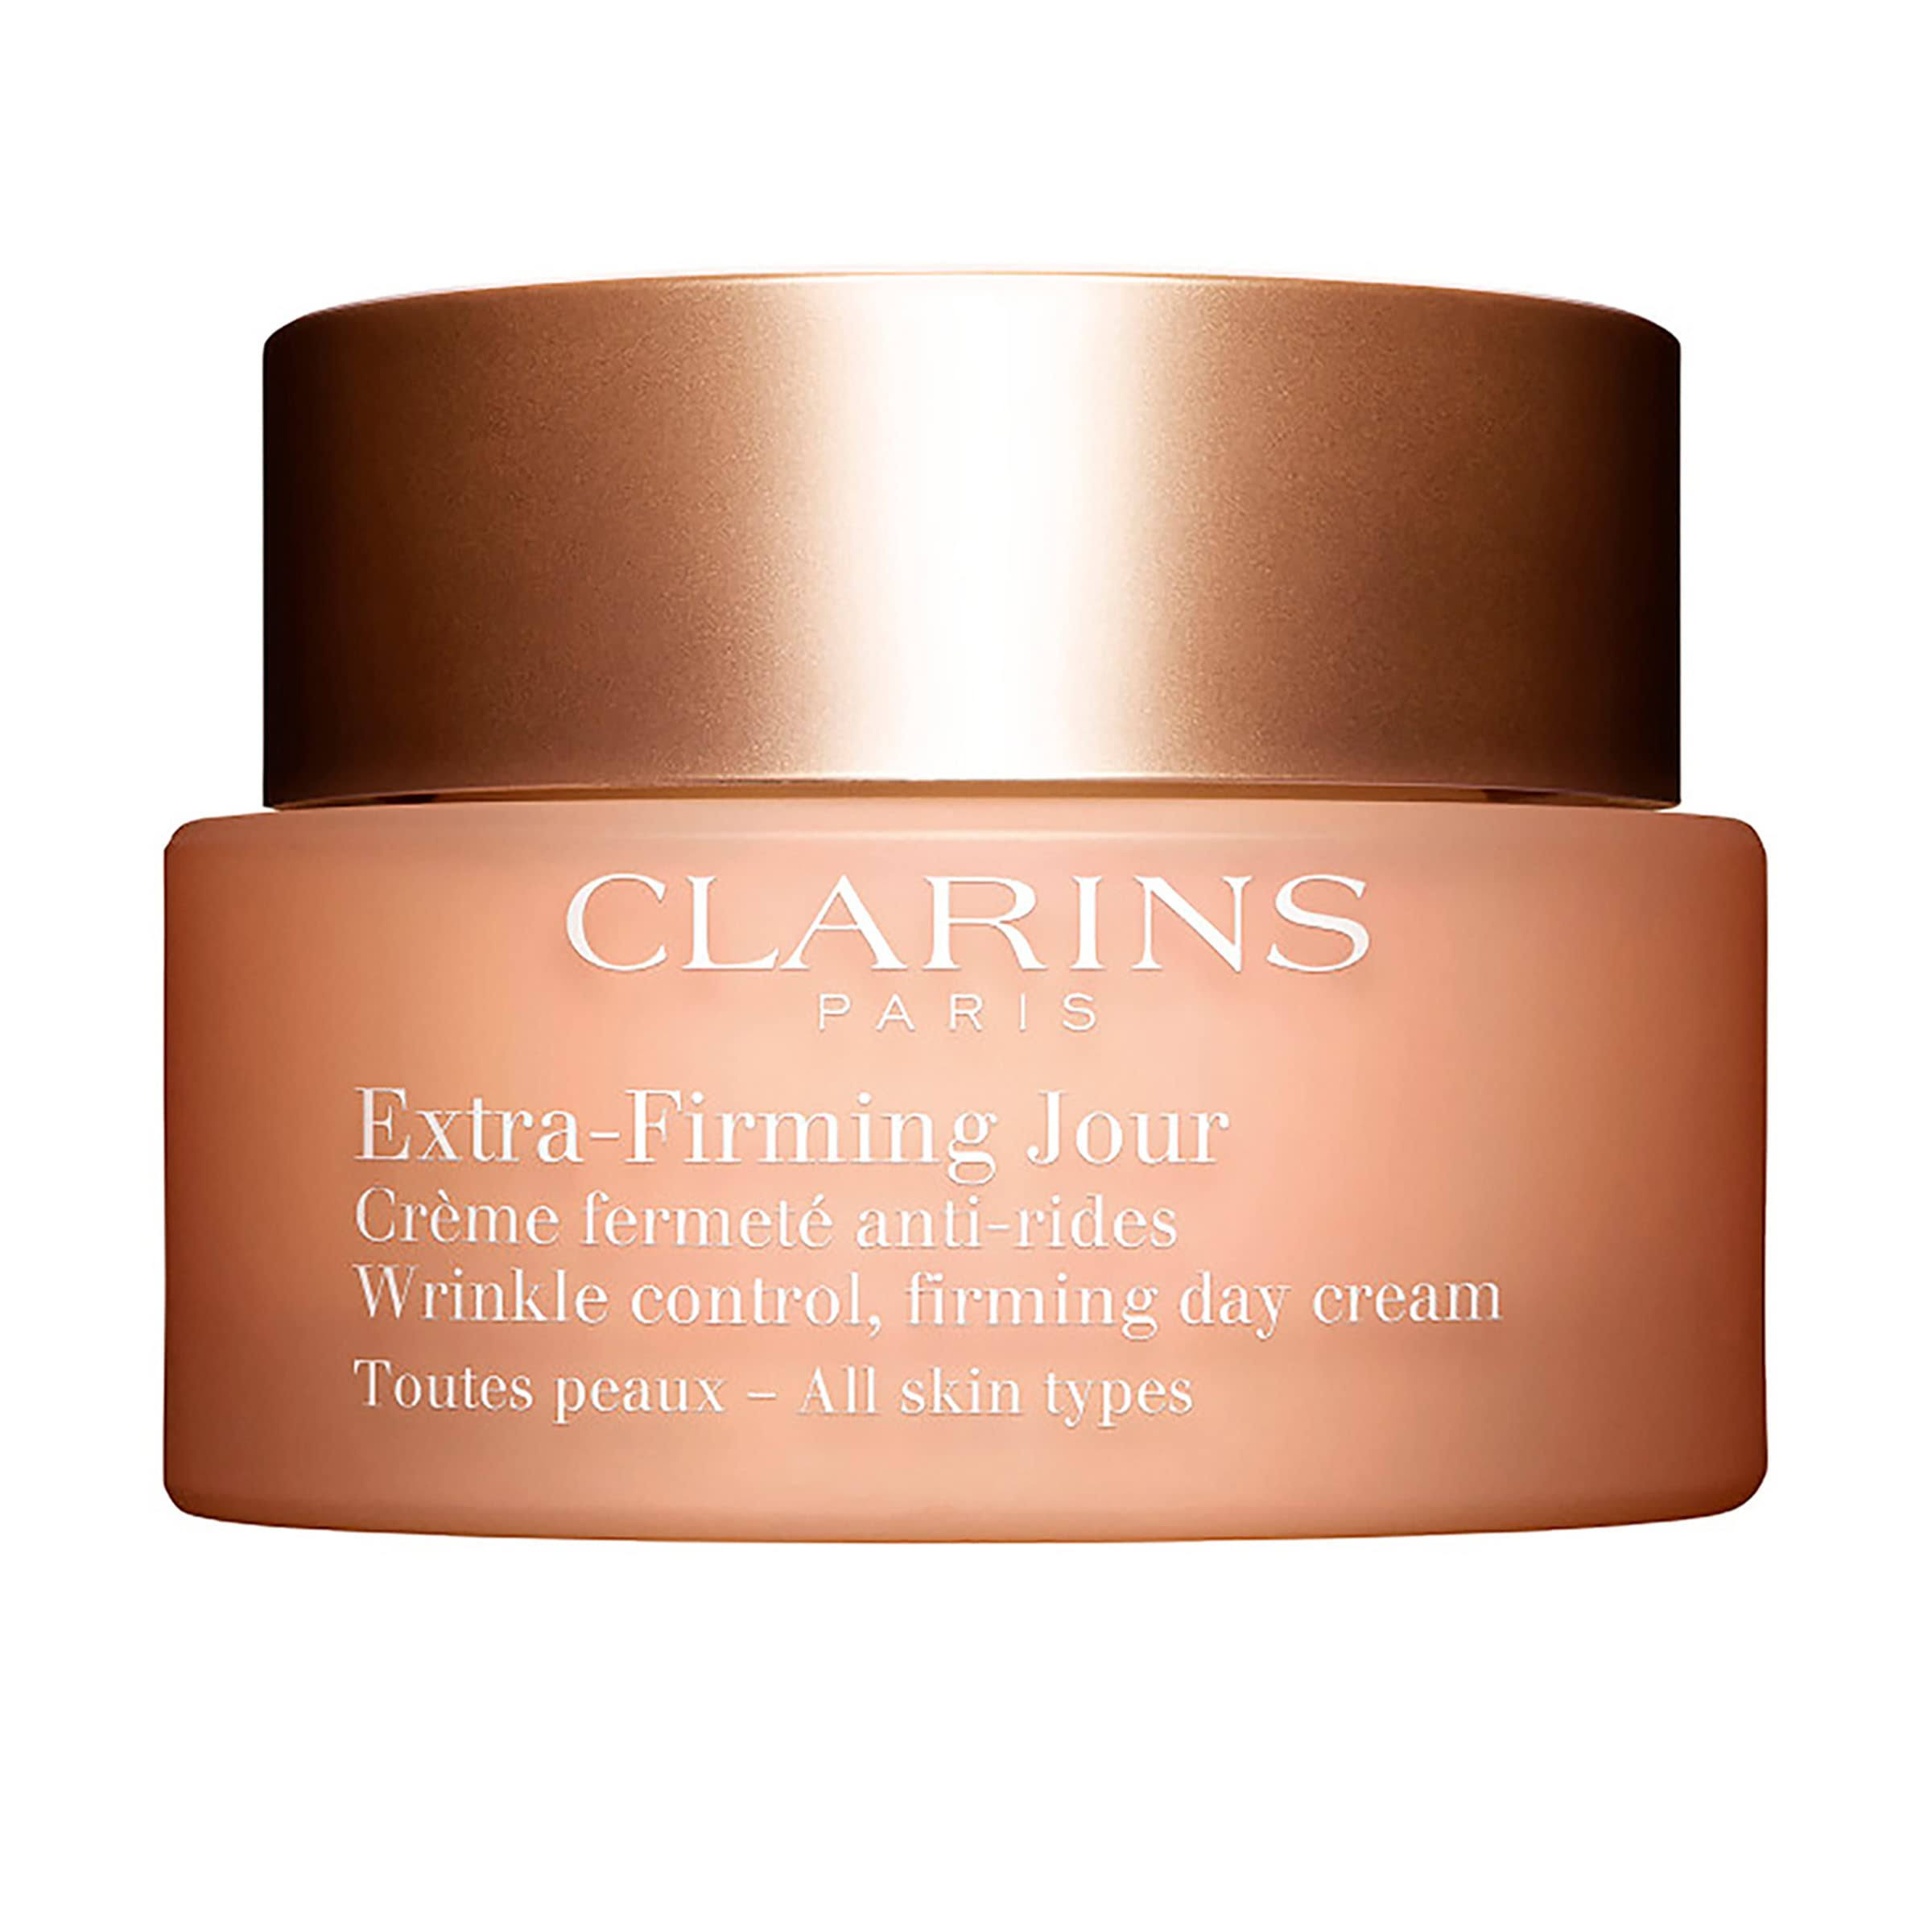 Clarins Extra Firming Day Cream - All Skin Types - 1.7 oz.